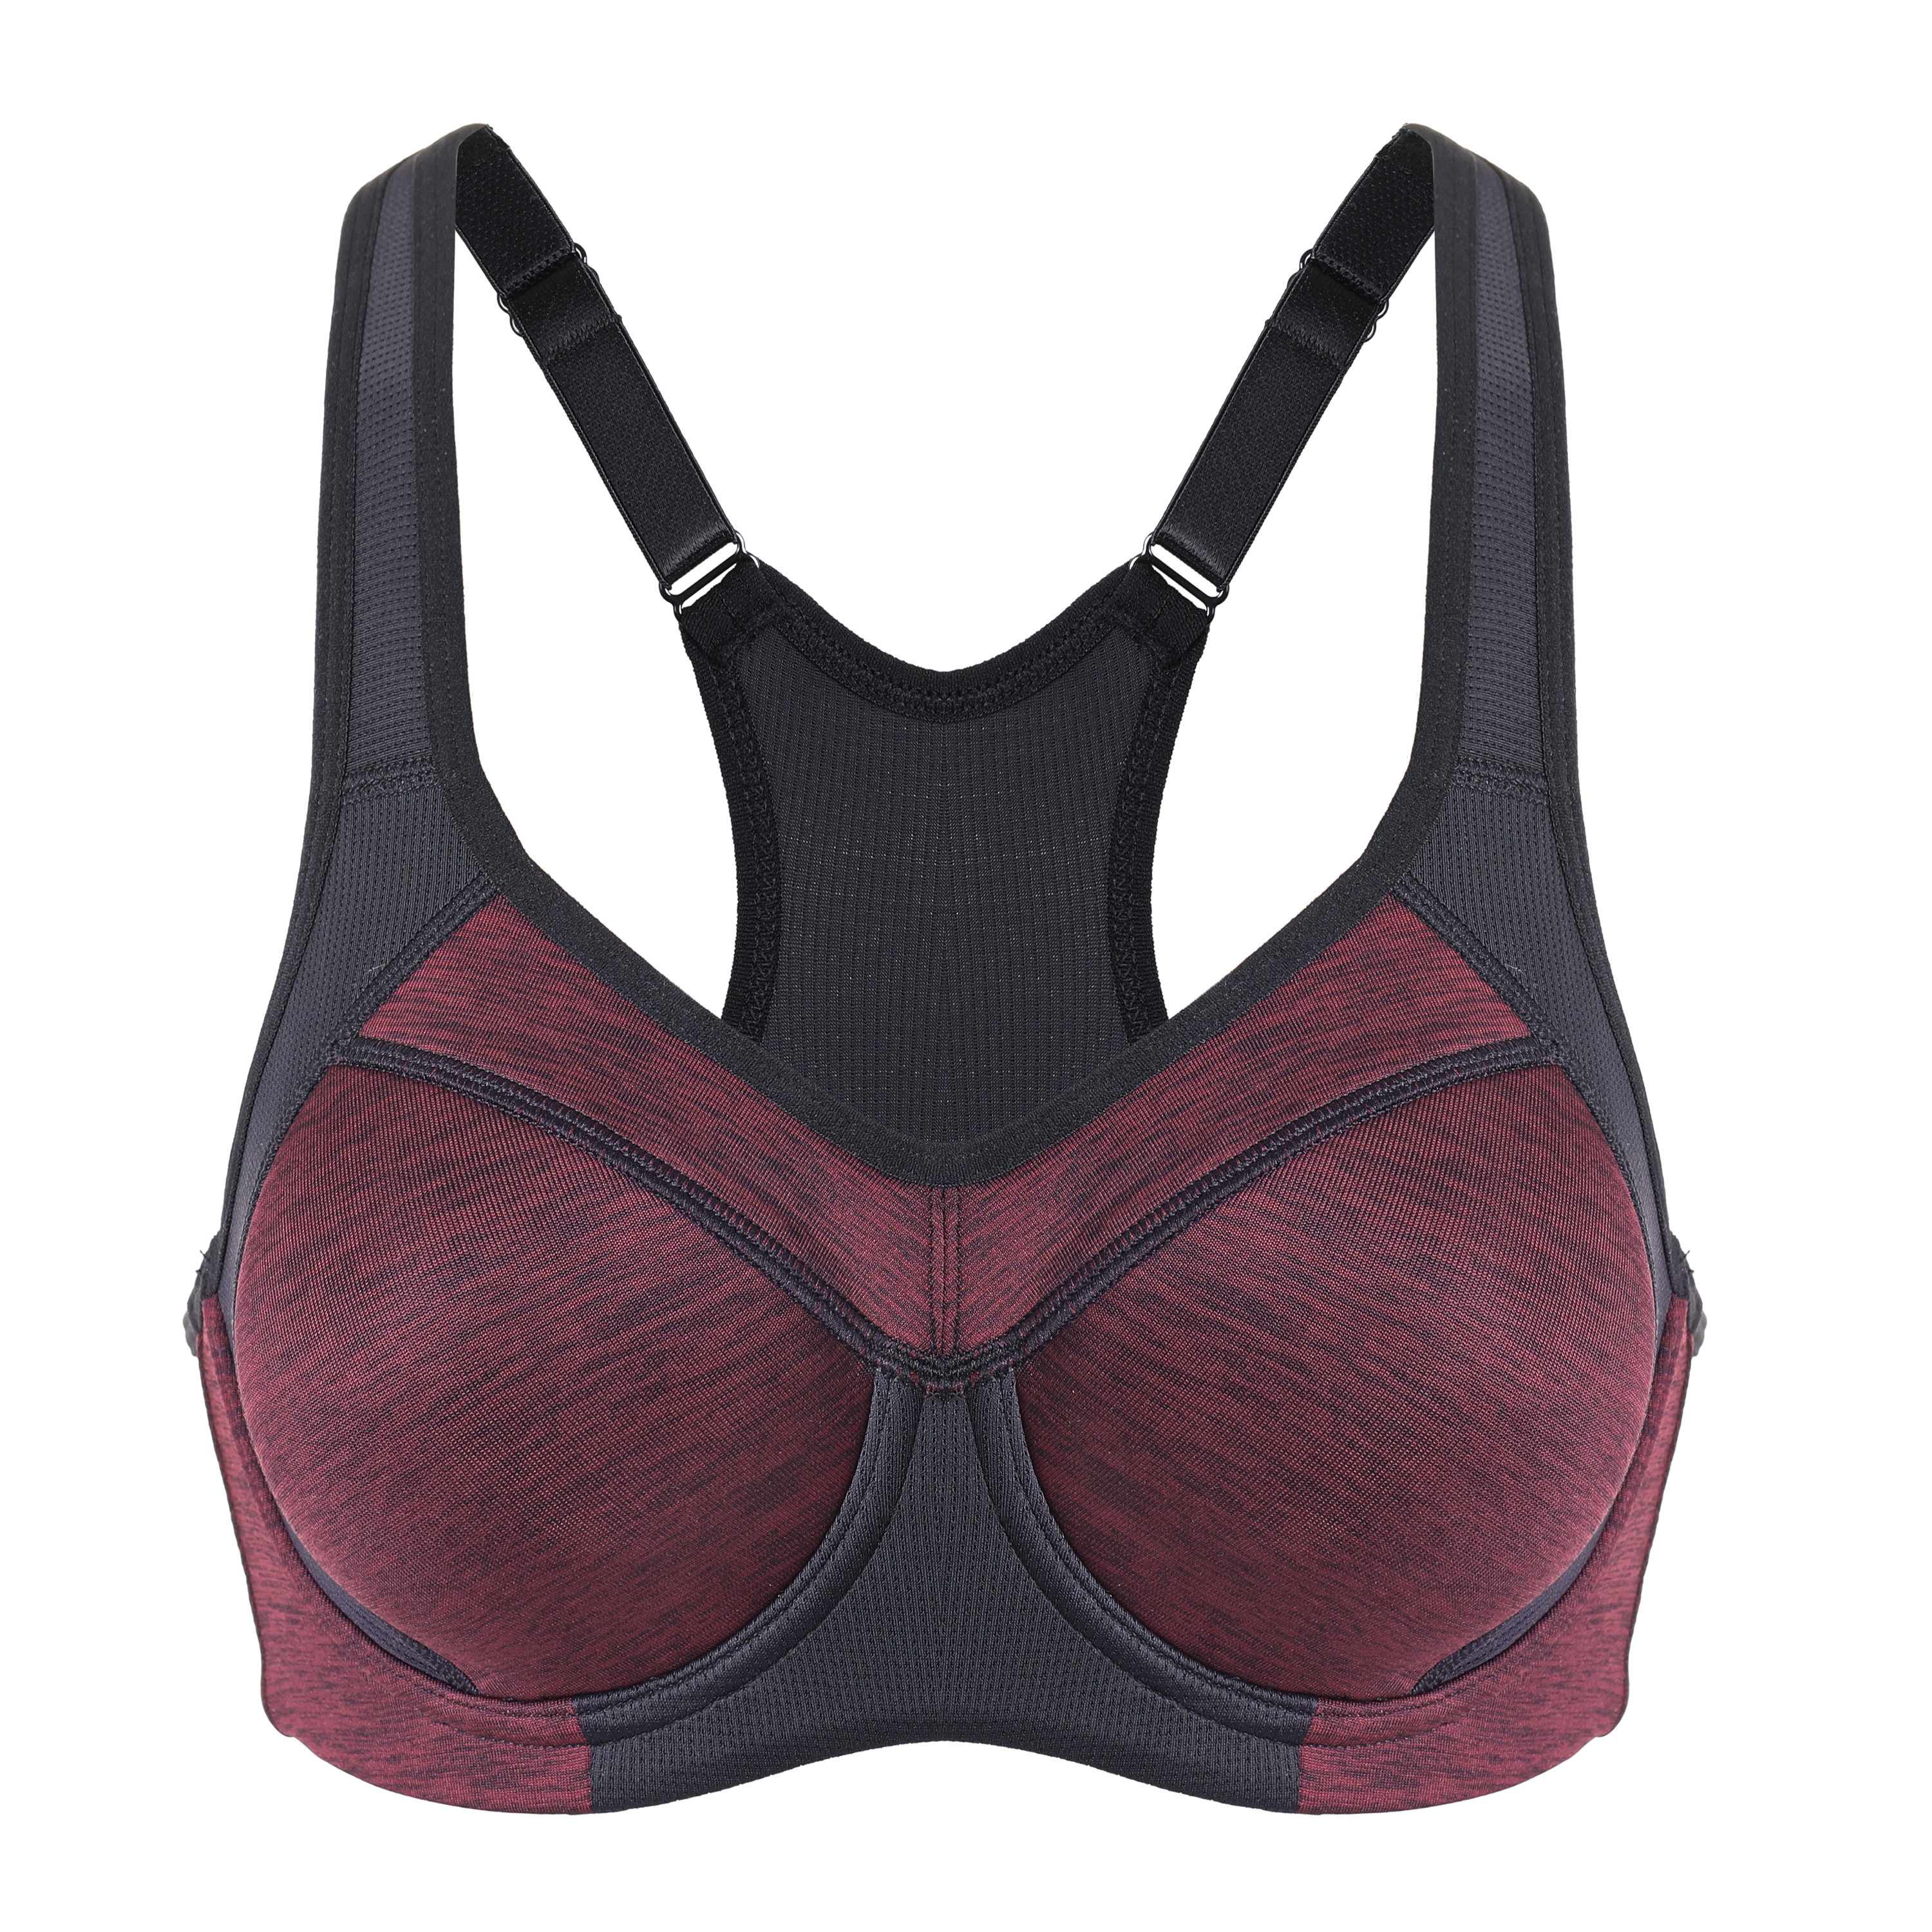 thumbnail 6 - SYROKAN Women&#039;s Underwire Sports Bra Support High Impact Racerback Lightly Lined